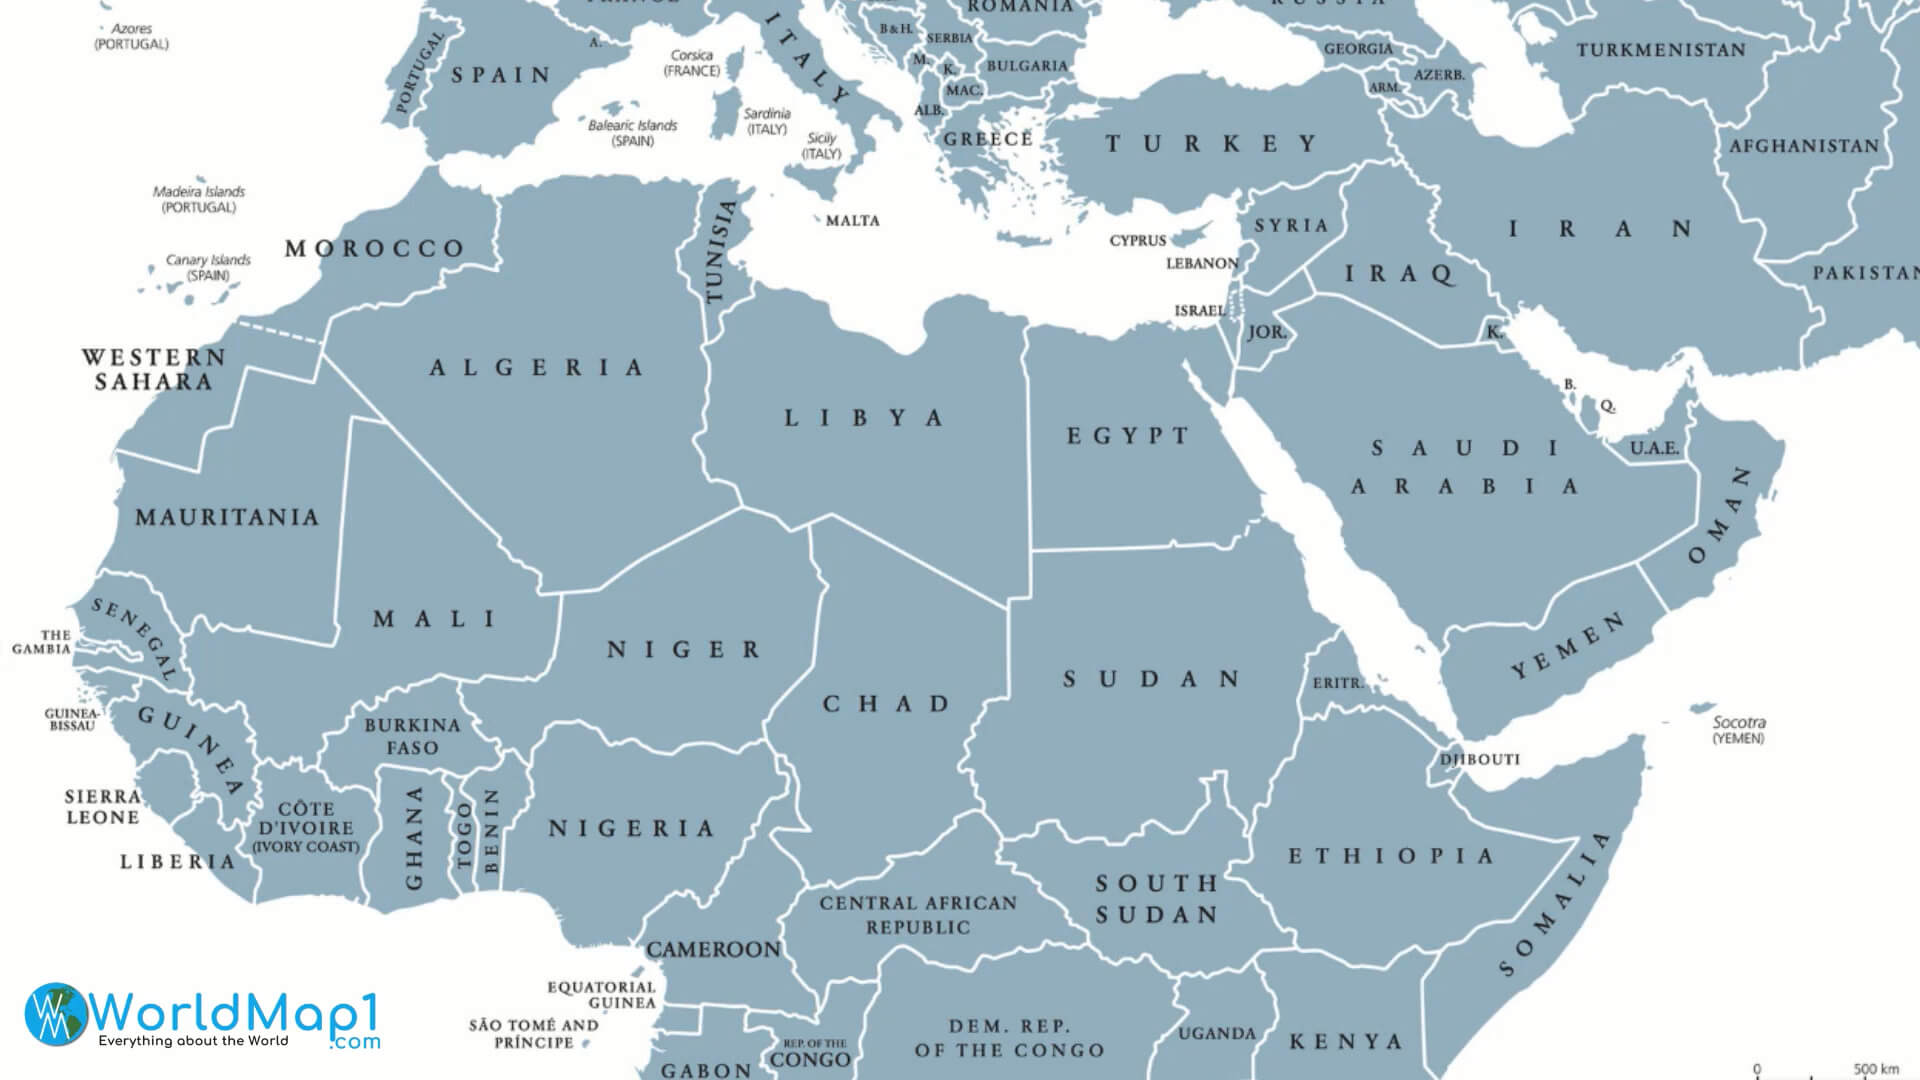 Africa Balkans and Middle East National Borders Map